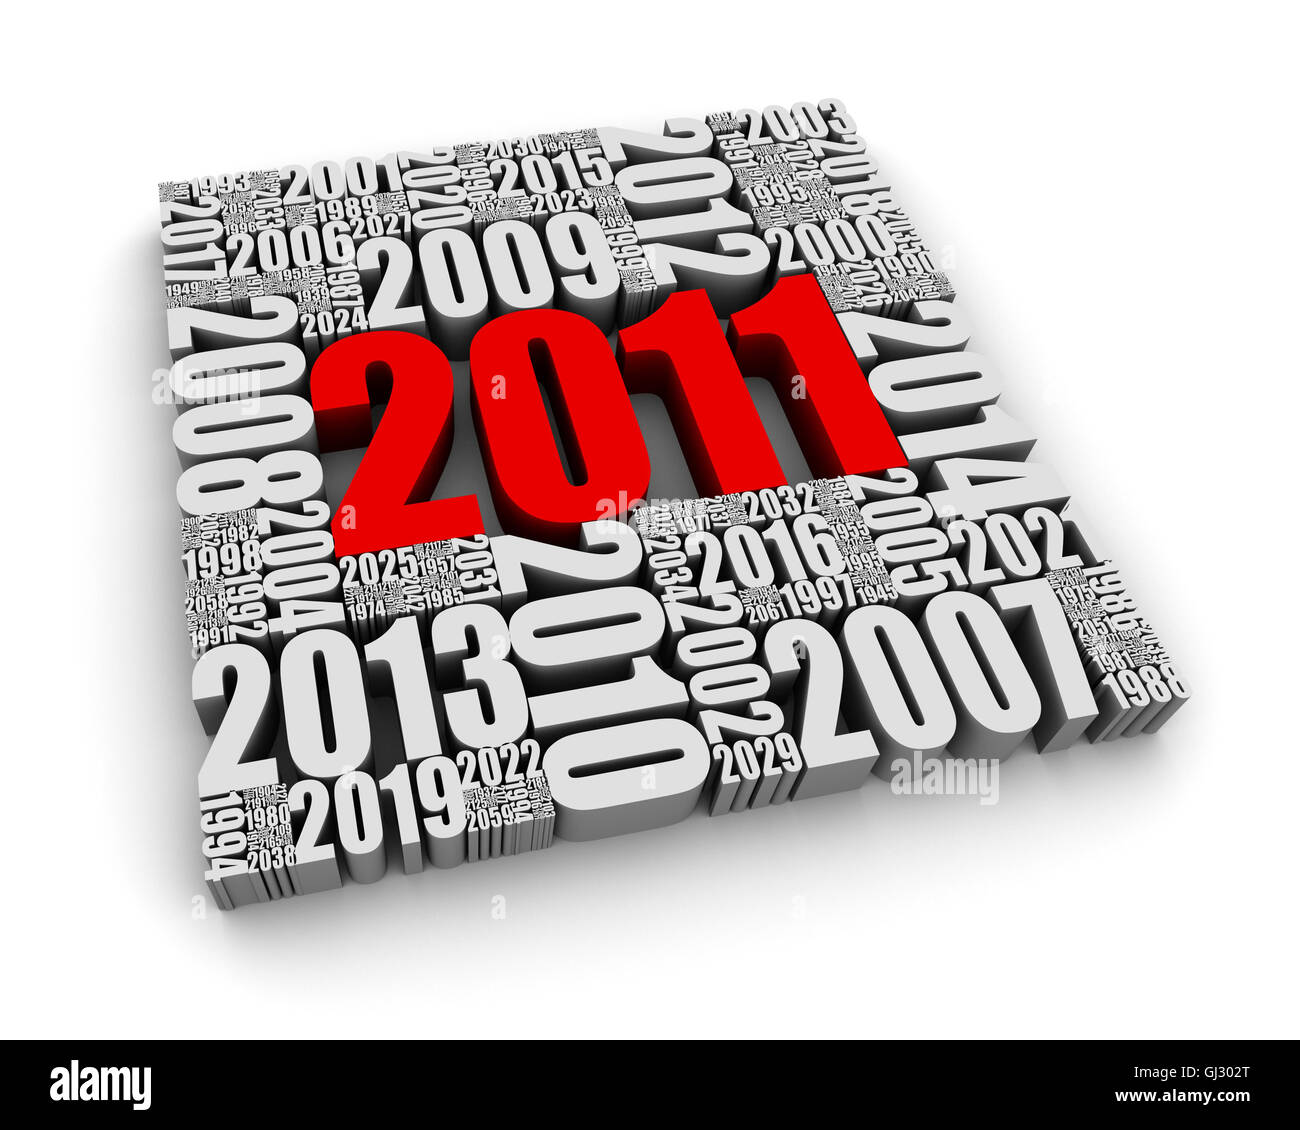 The Year 2011 Stock Photo